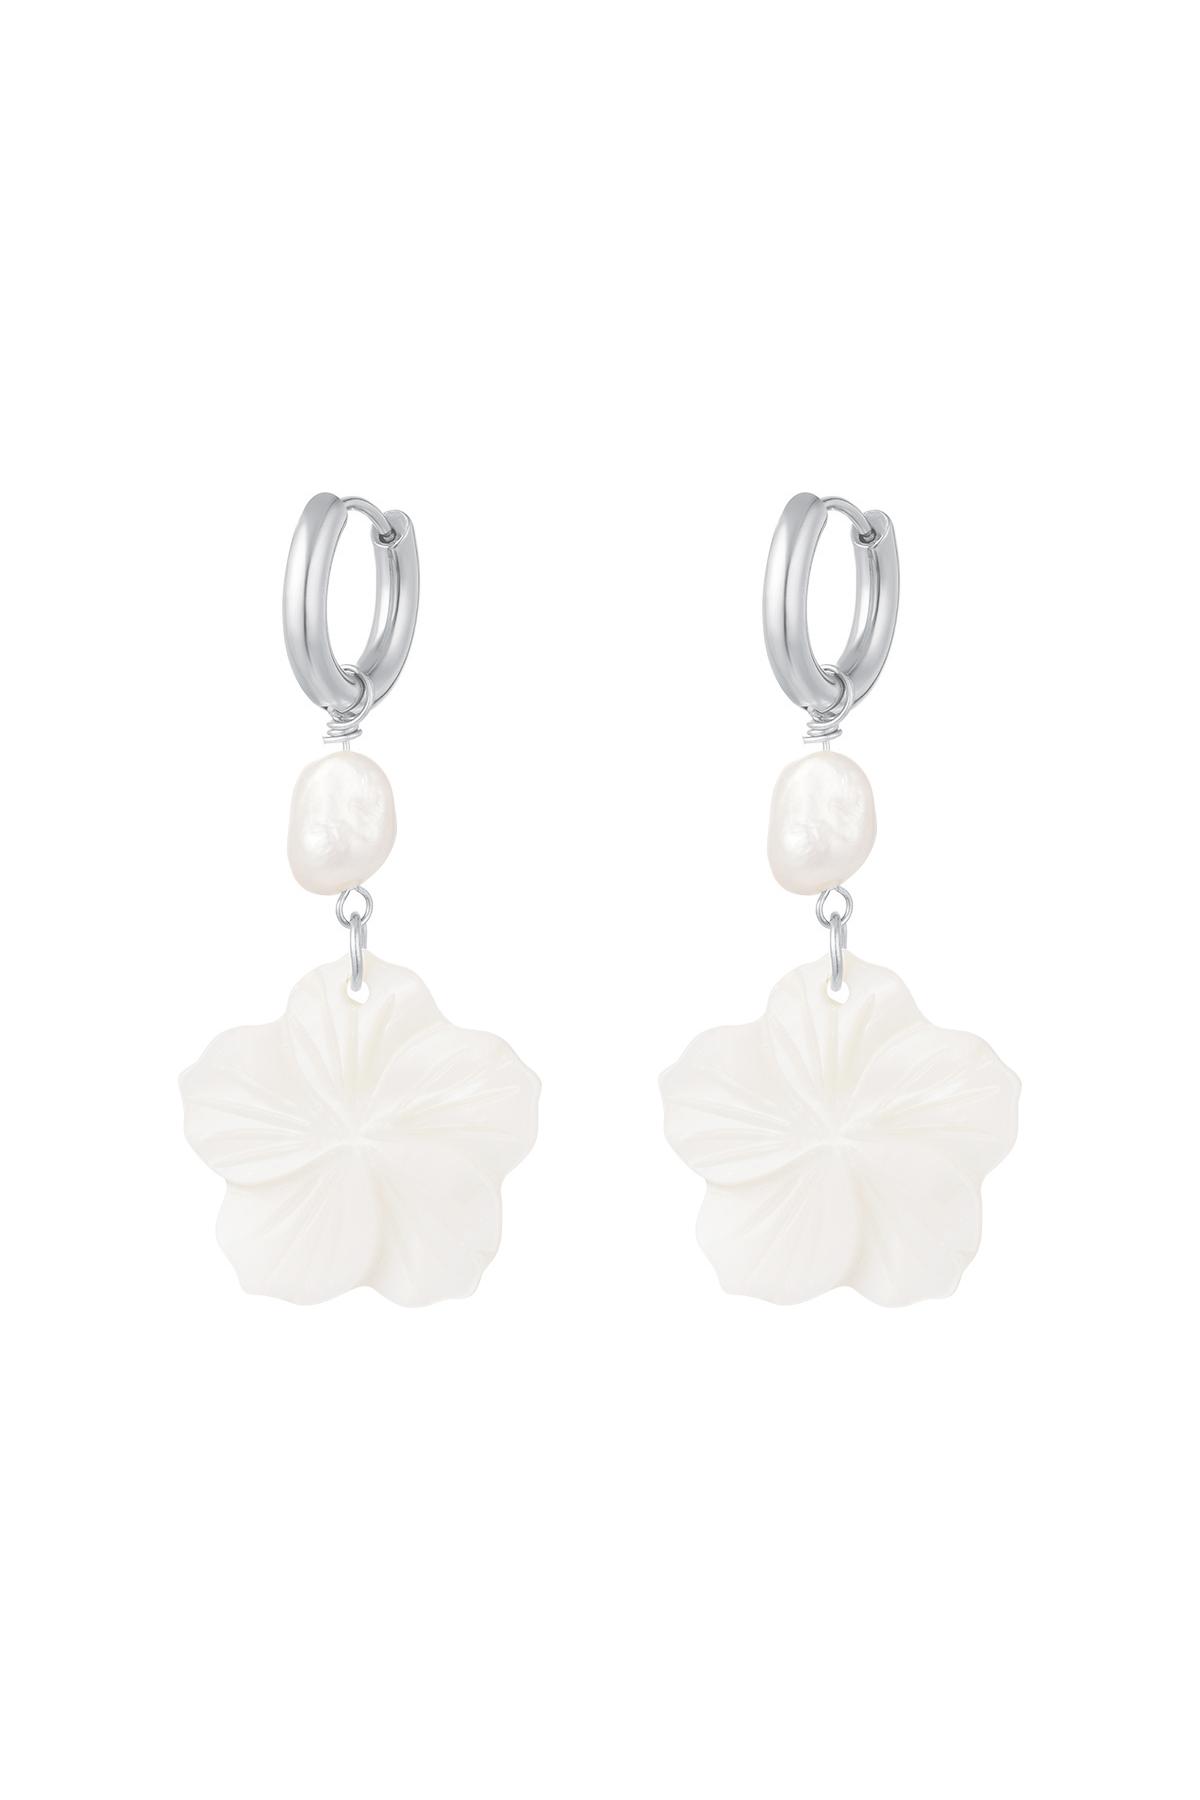 Flower earrings - Beach collection Silver Stainless Steel